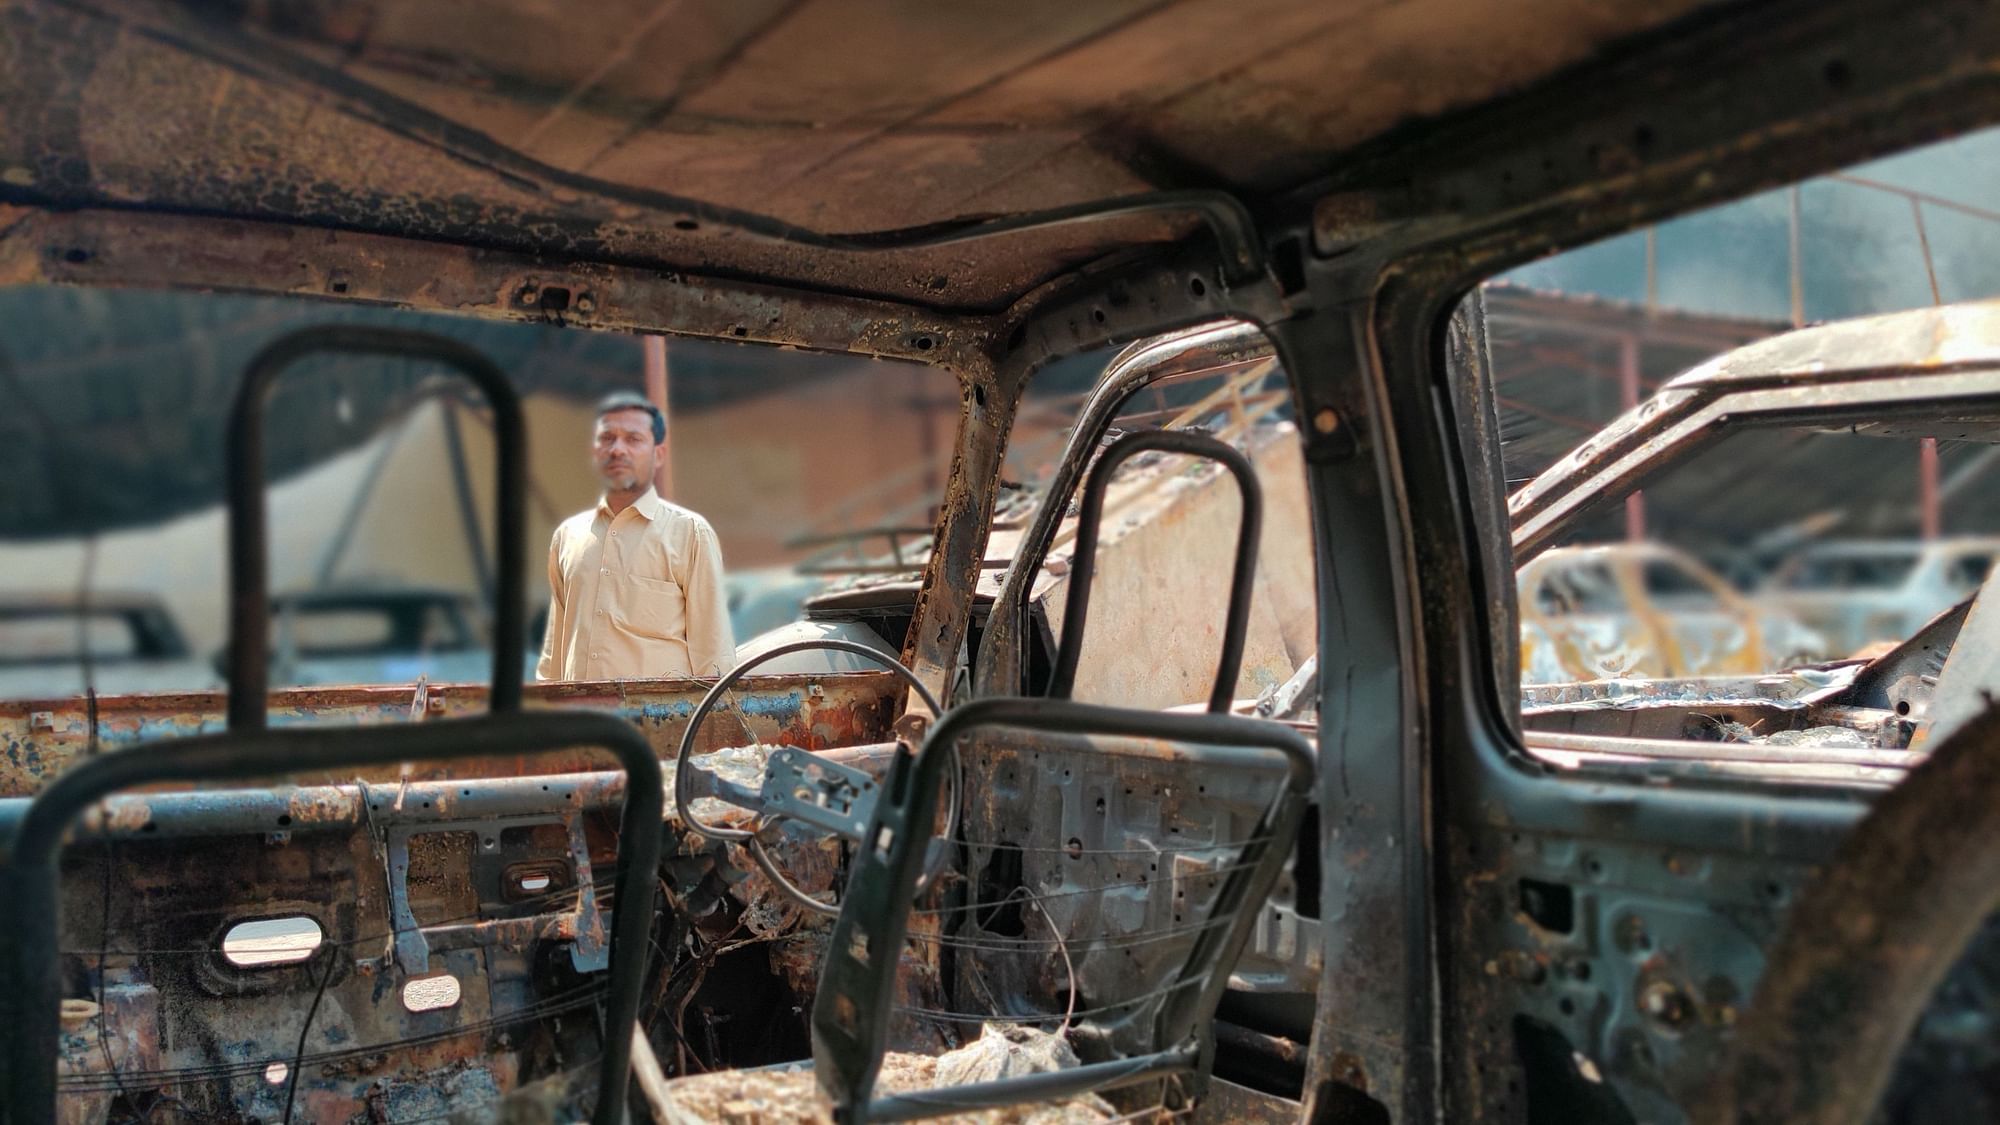 From burnt down shops to charred transport vehicles, violence in northeast Delhi has left its people in doldrums.